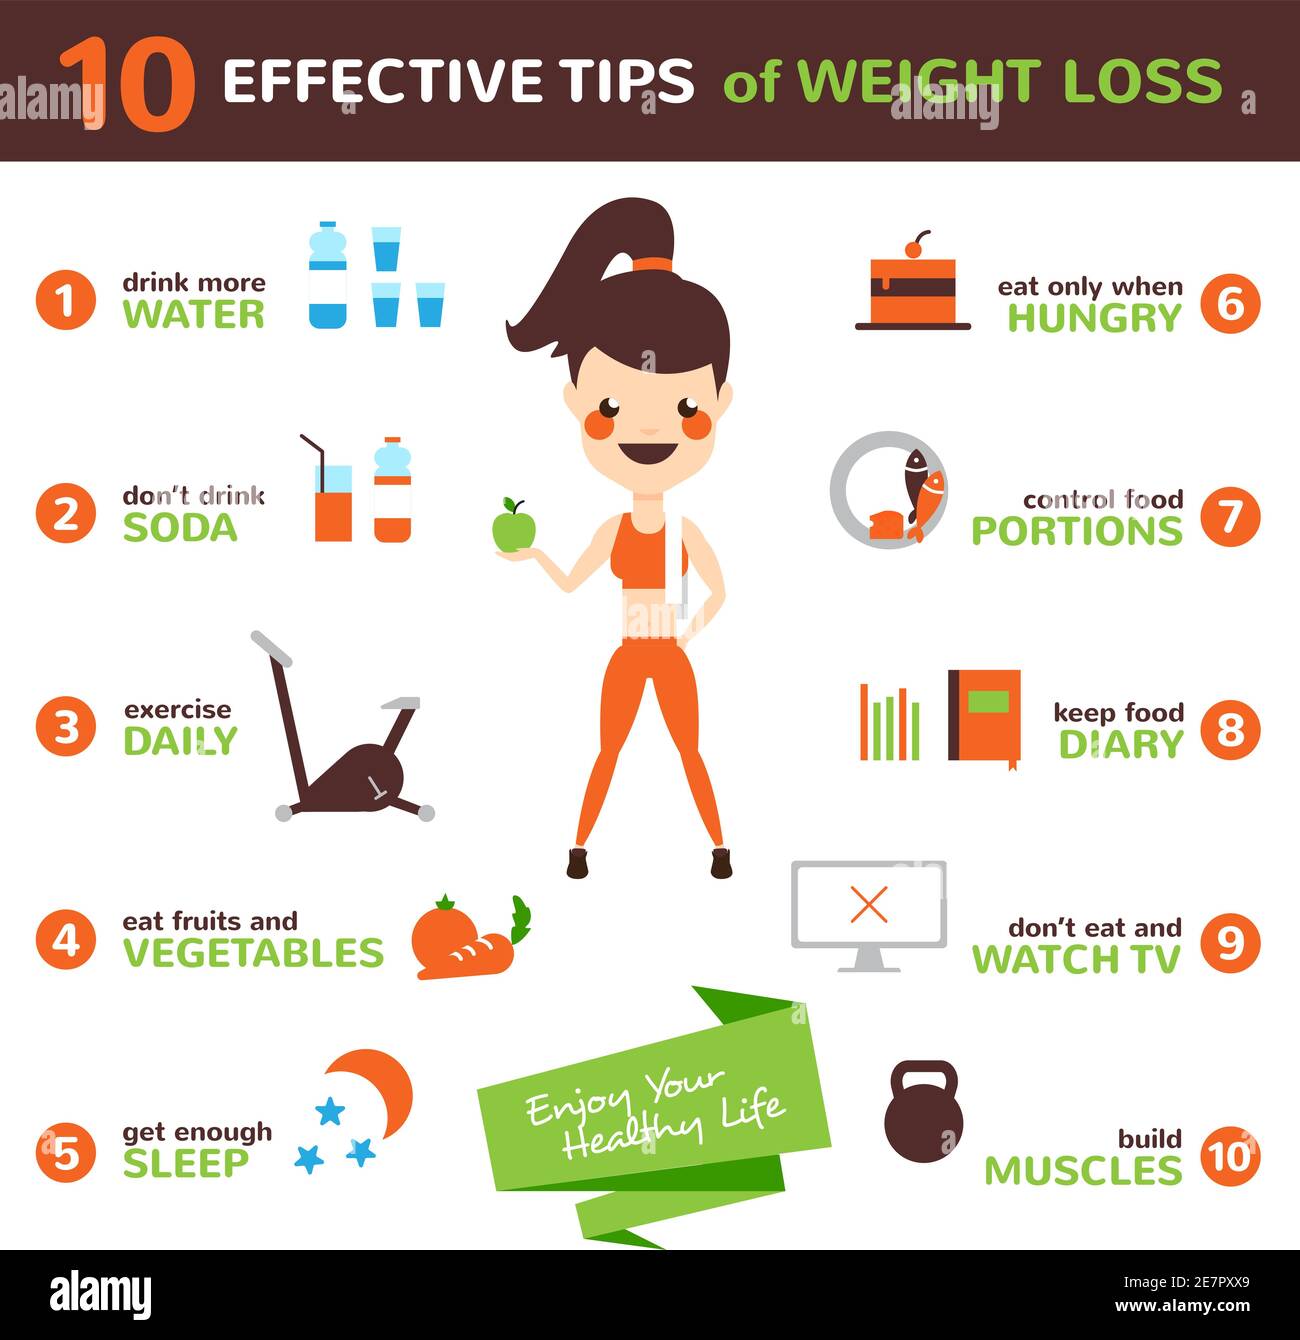 https://c8.alamy.com/comp/2E7PXX9/diet-infographic-set-with-effective-tips-of-weight-loss-flat-vector-illustration-2E7PXX9.jpg